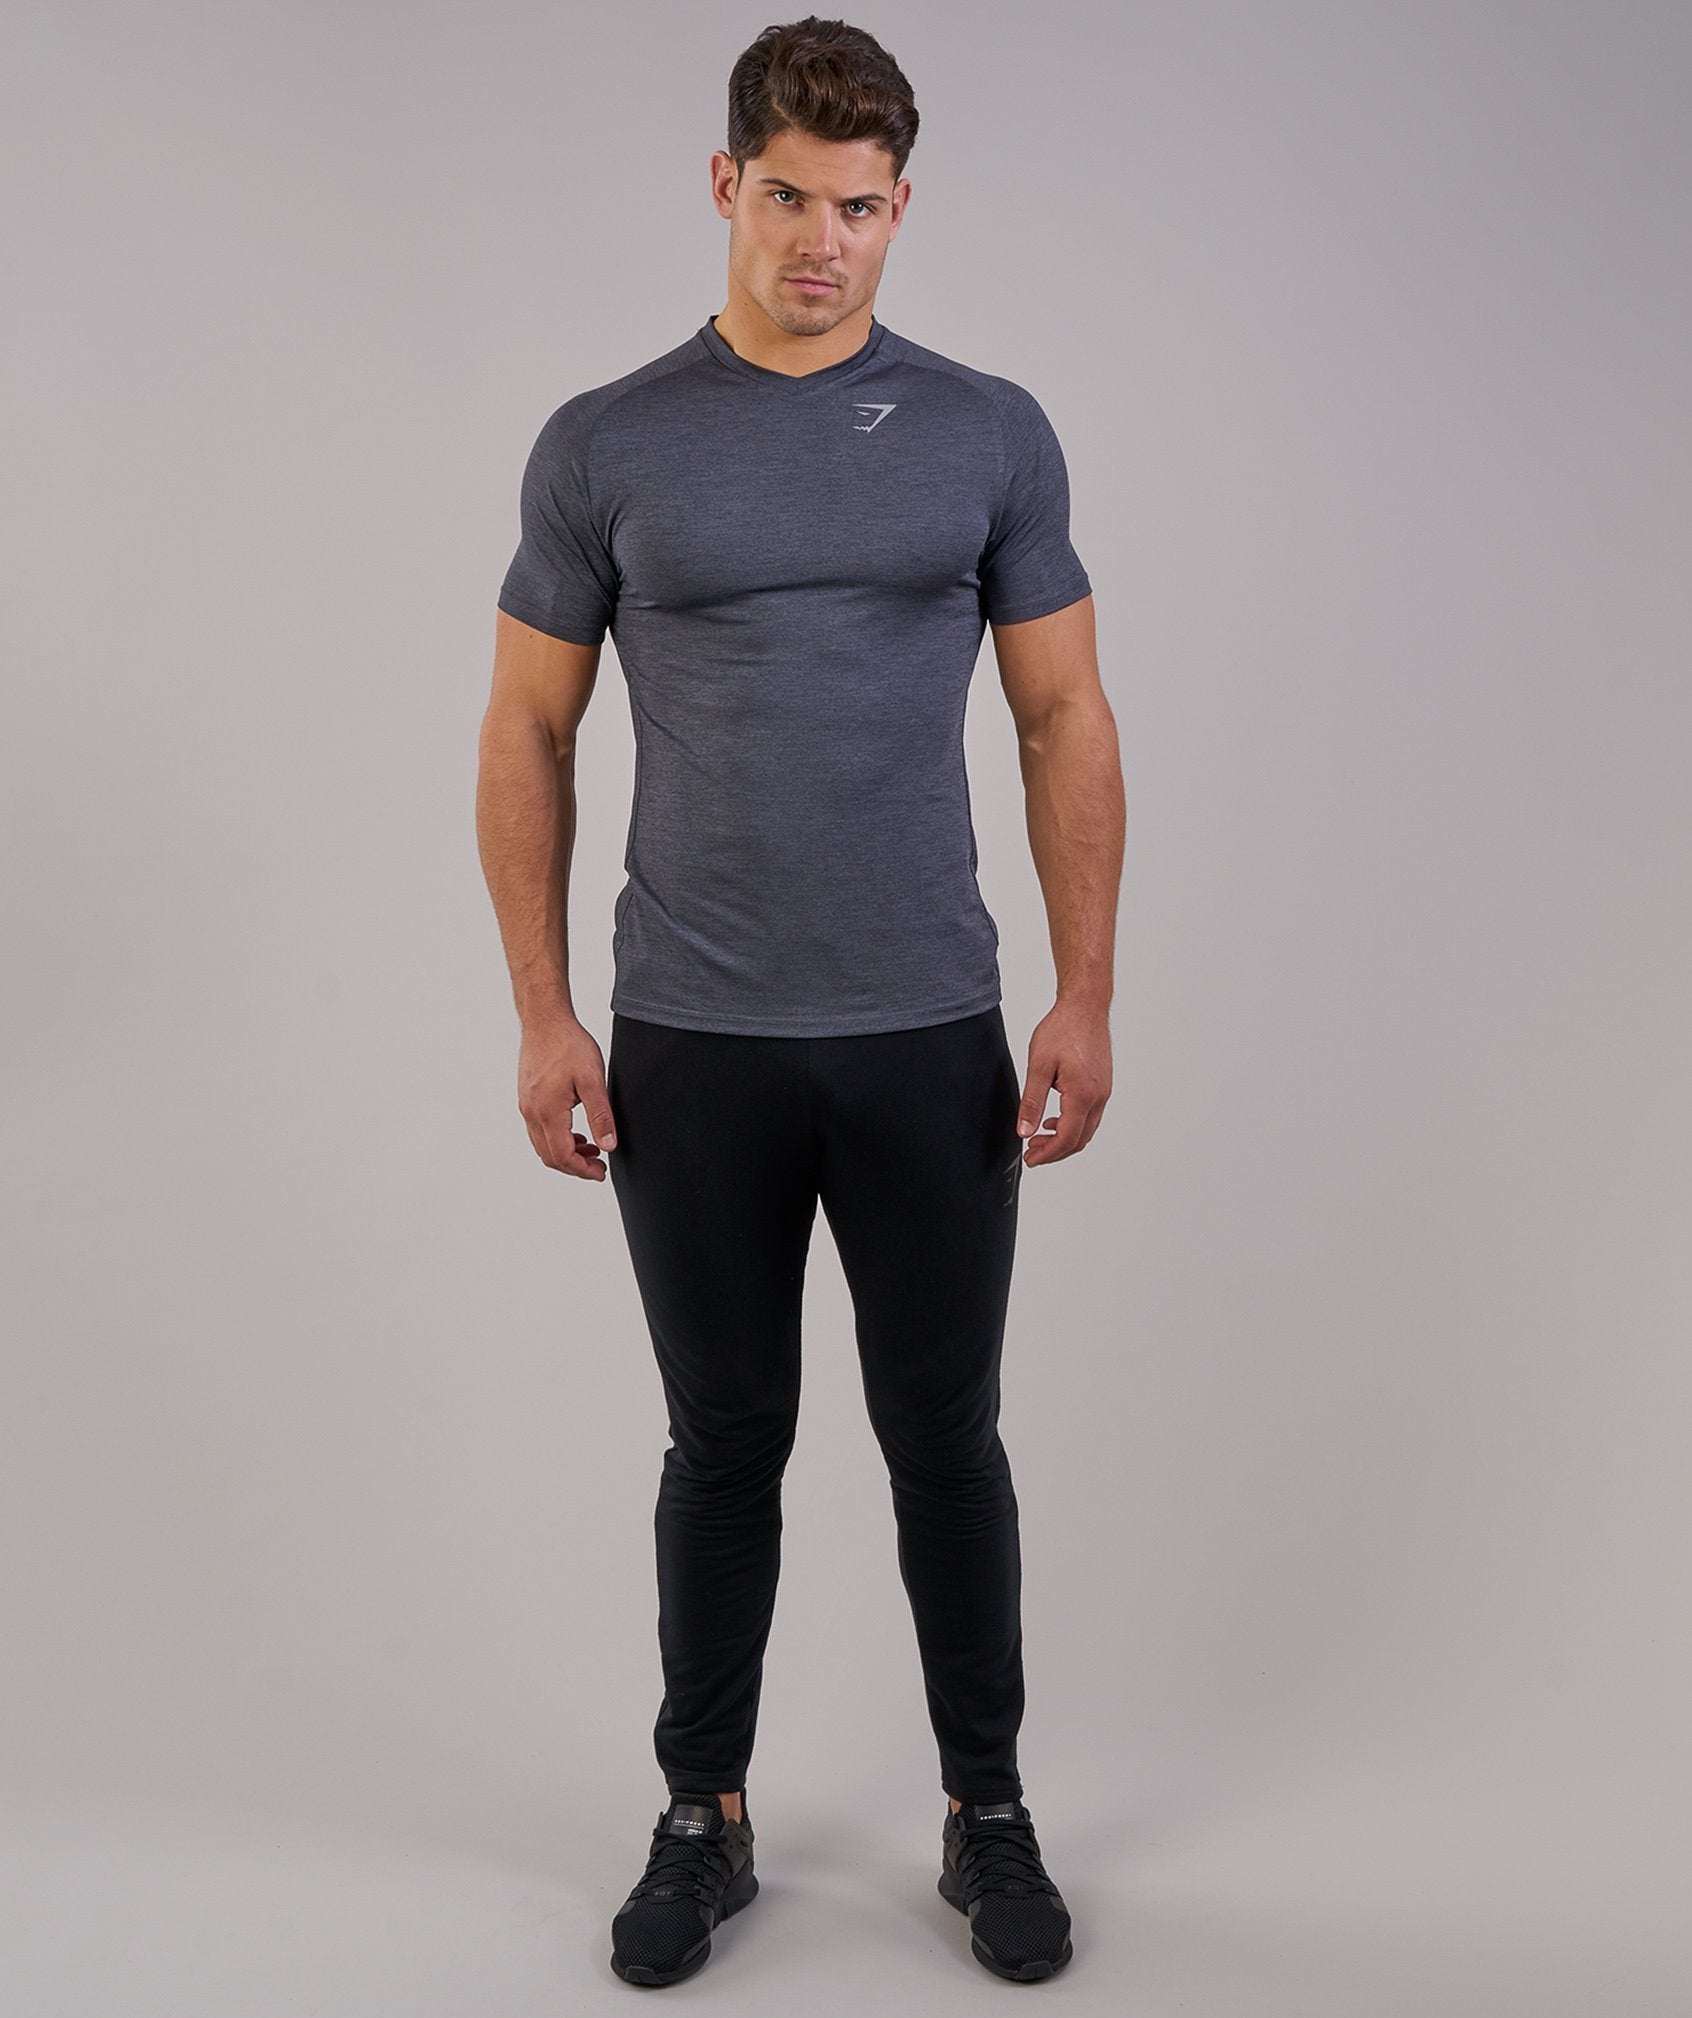 Convert T-Shirt in Charcoal Marl - view 4